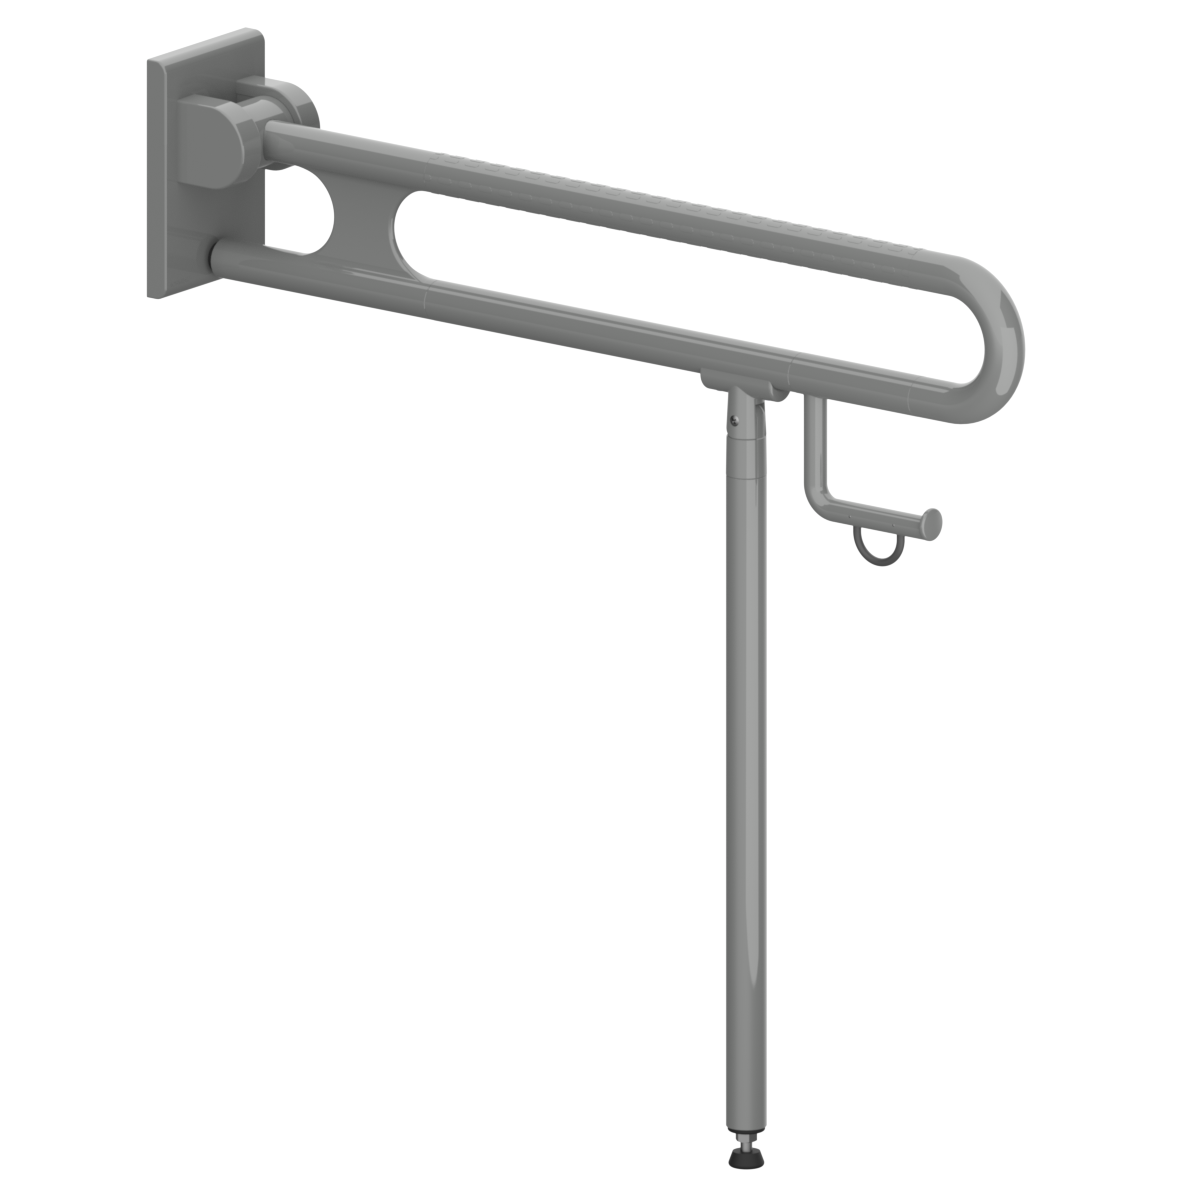 Nylon Care 400 Lift-up support rail FR, with floor support (800 mm), left and right, L = 850 mm, Dark grey